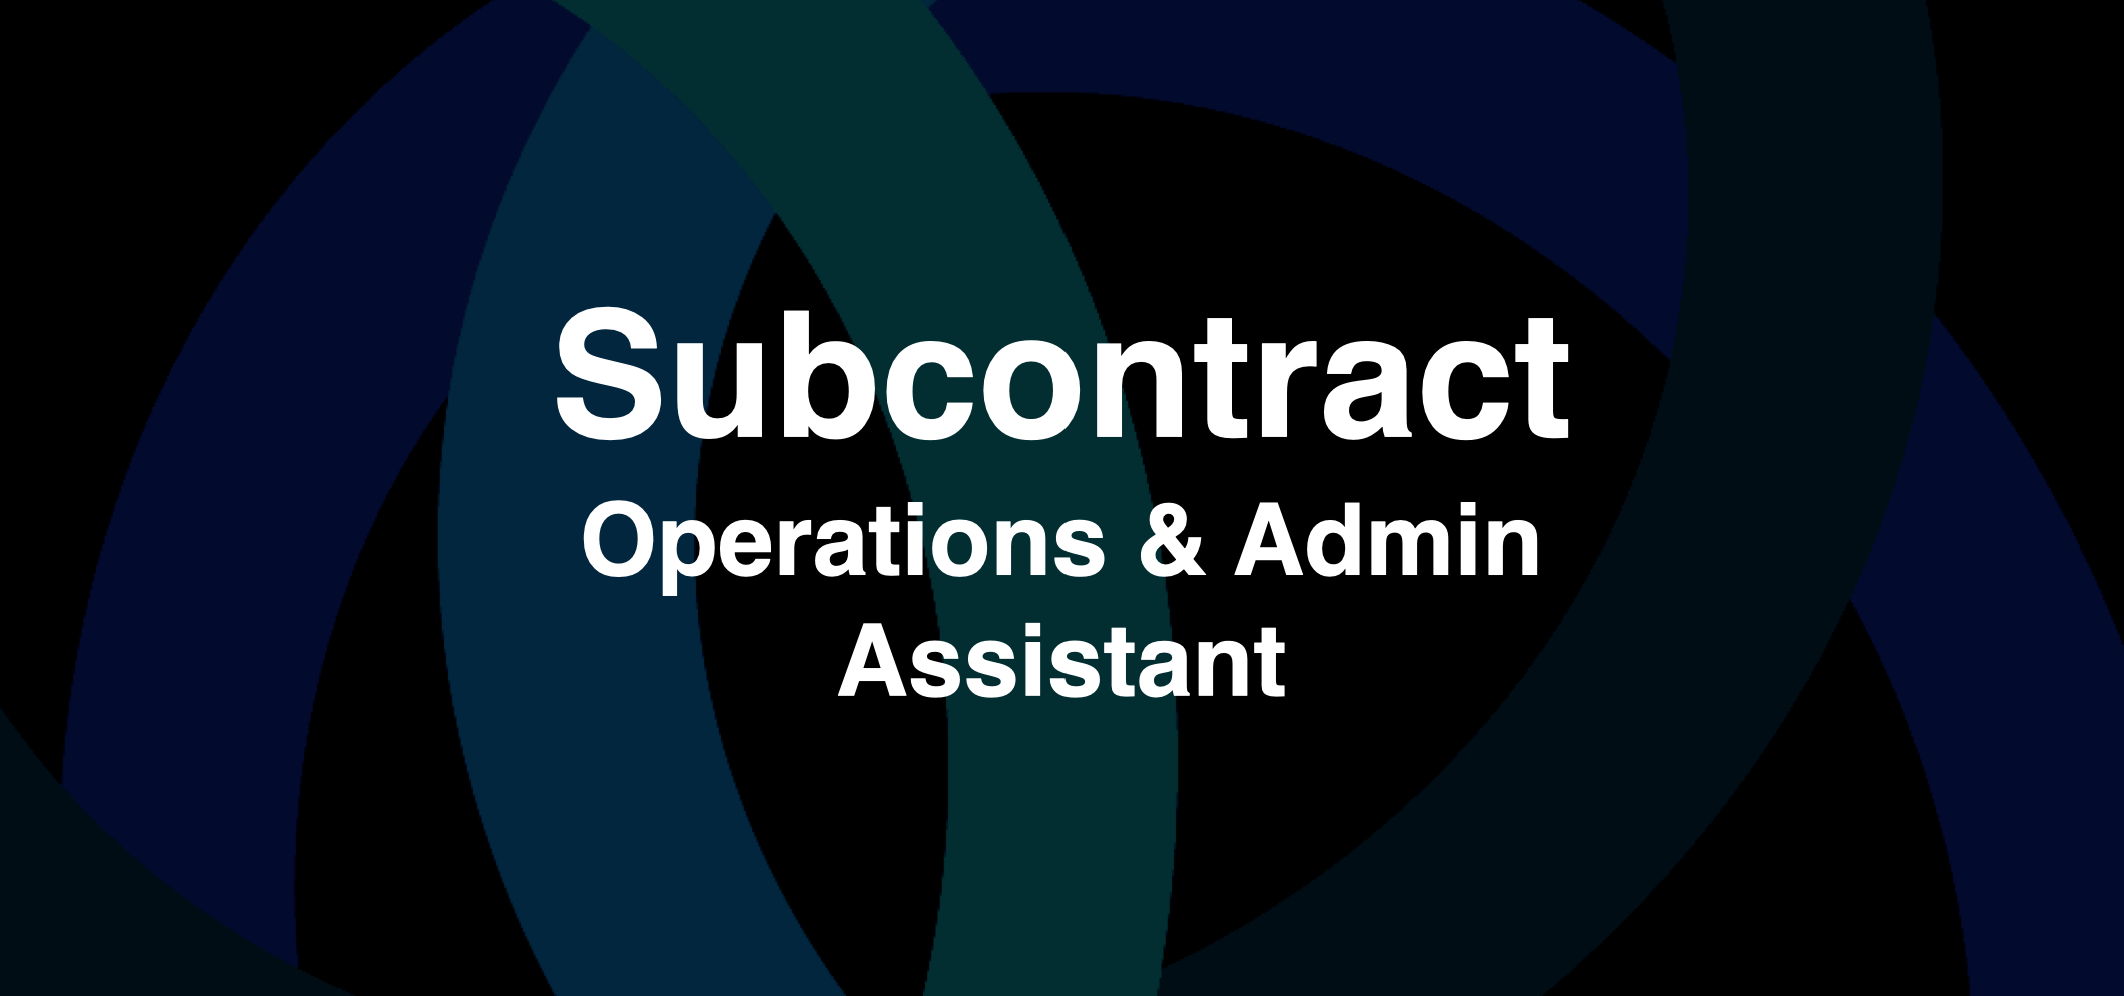 Subcontract: Operations & Admin Assistant